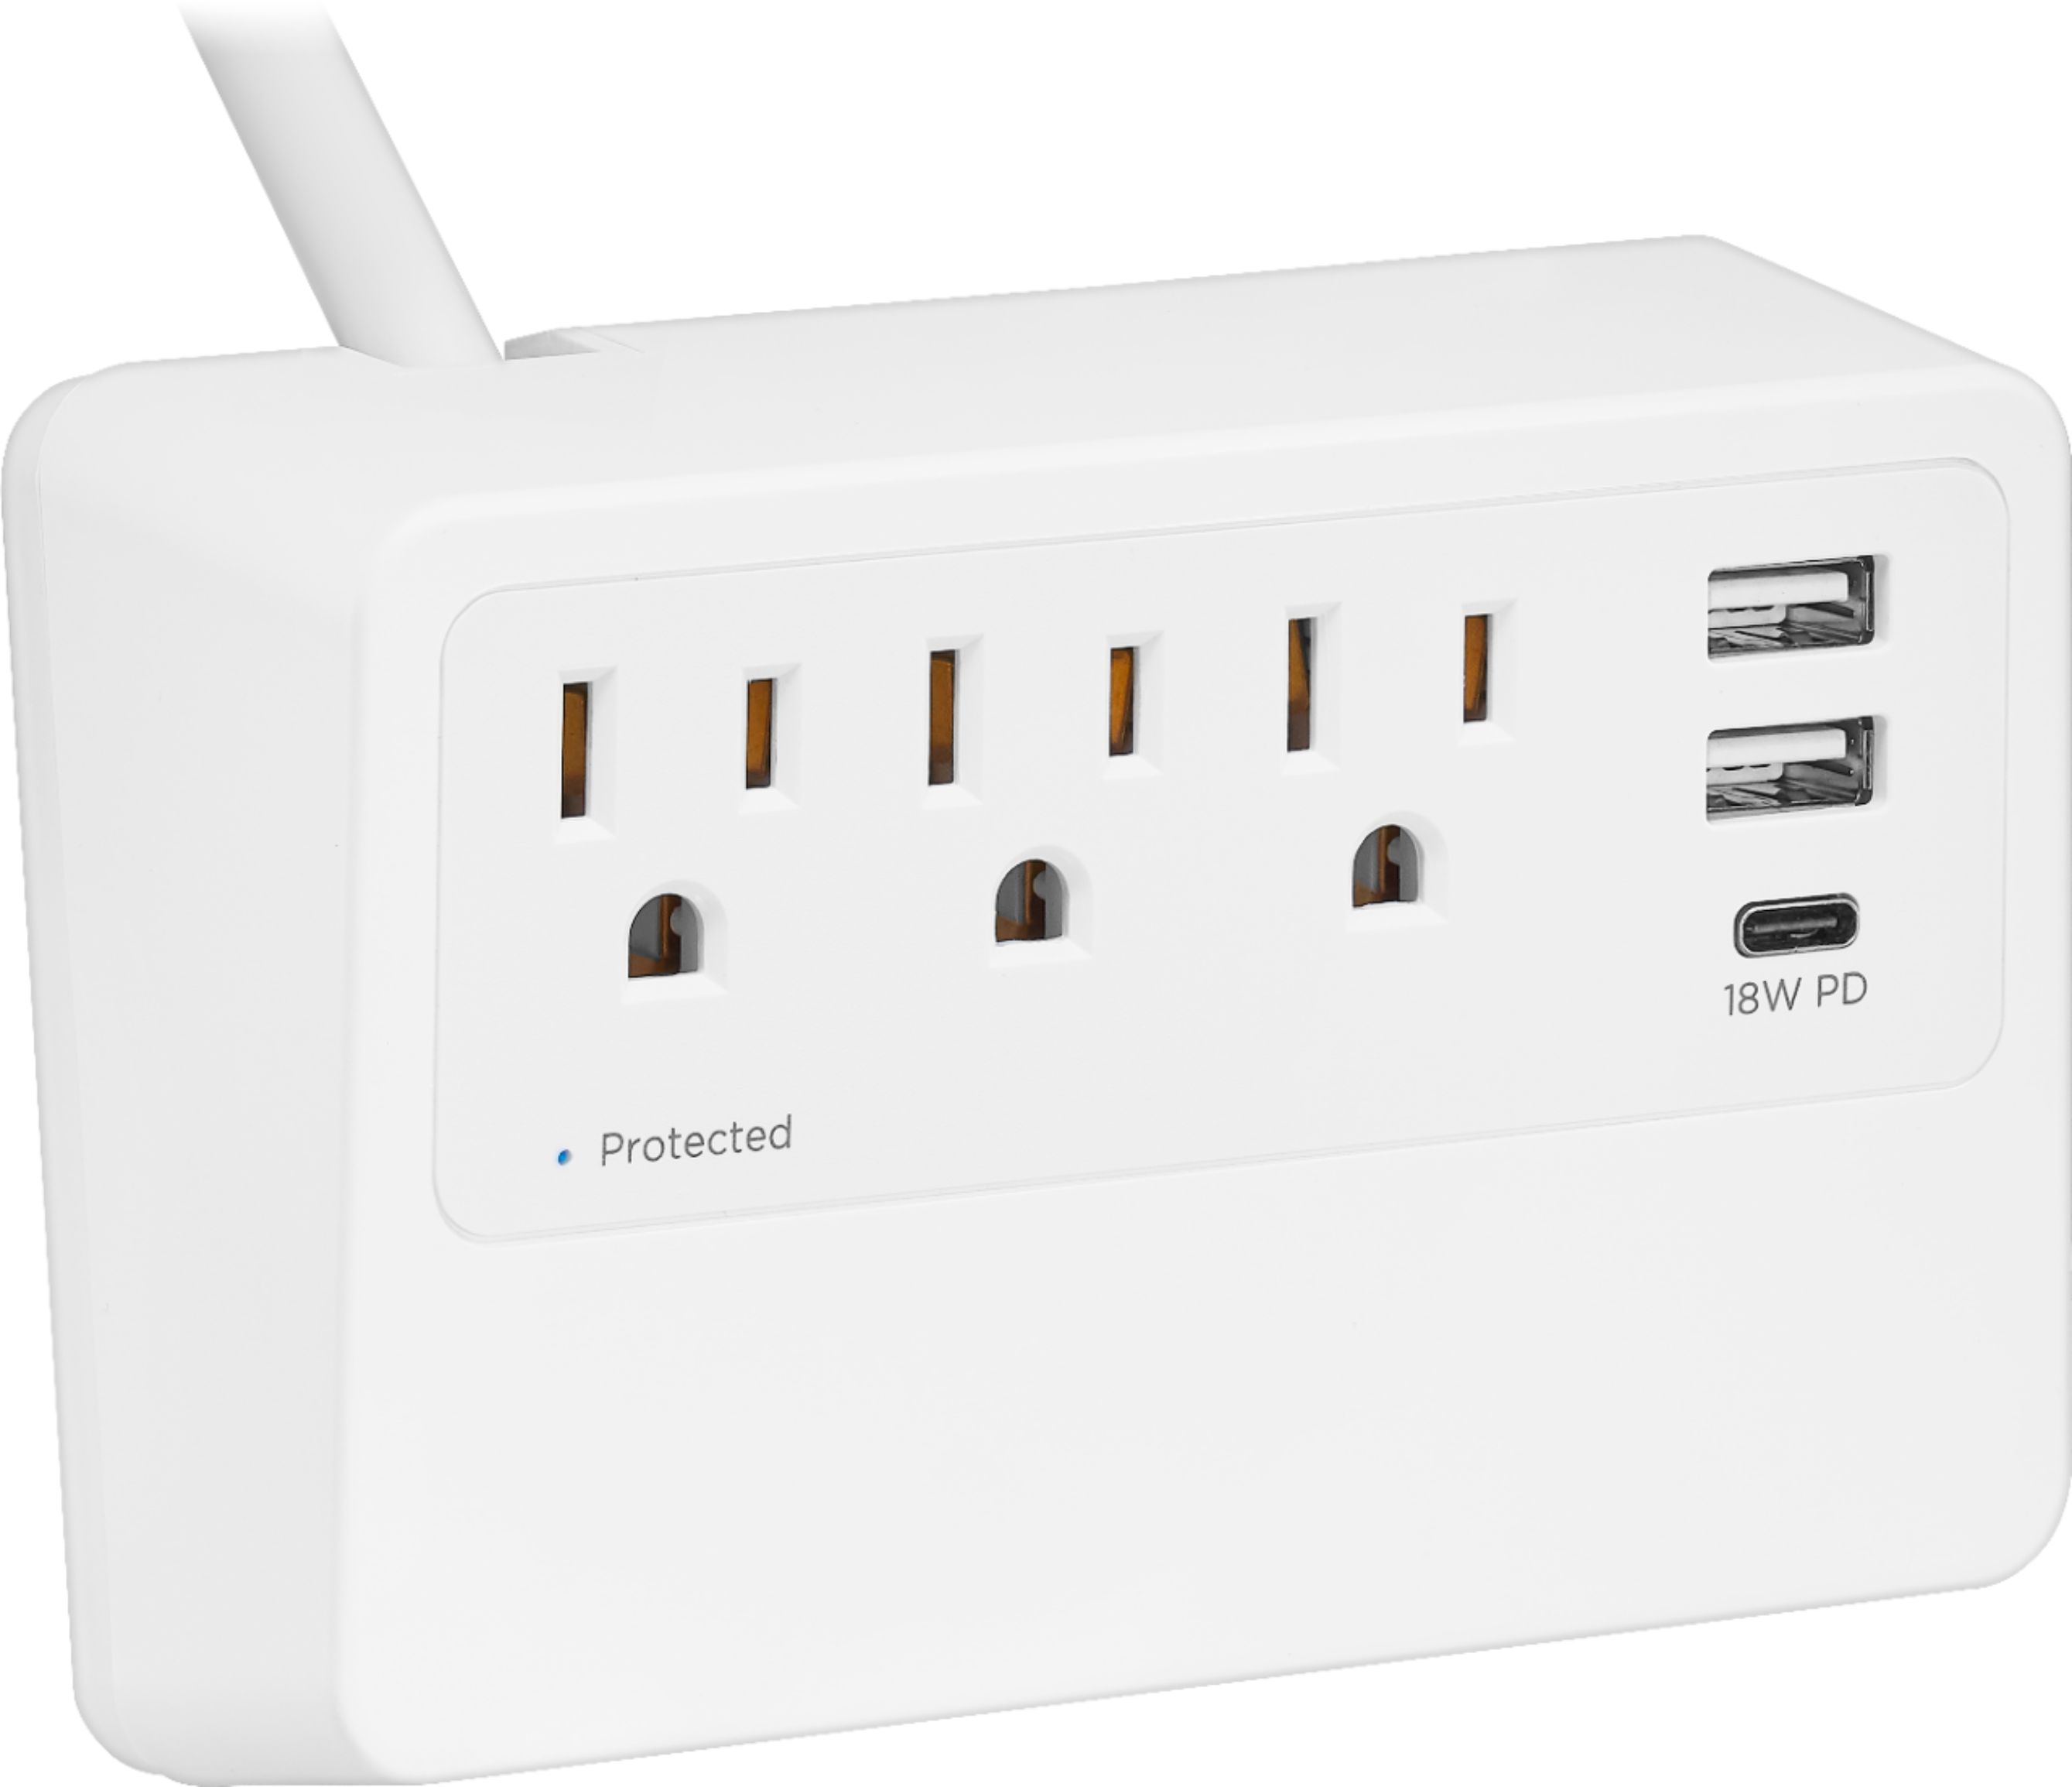 Insignia - 3-Outlet/3-USB Desktop Power Tap Surge Protector - White